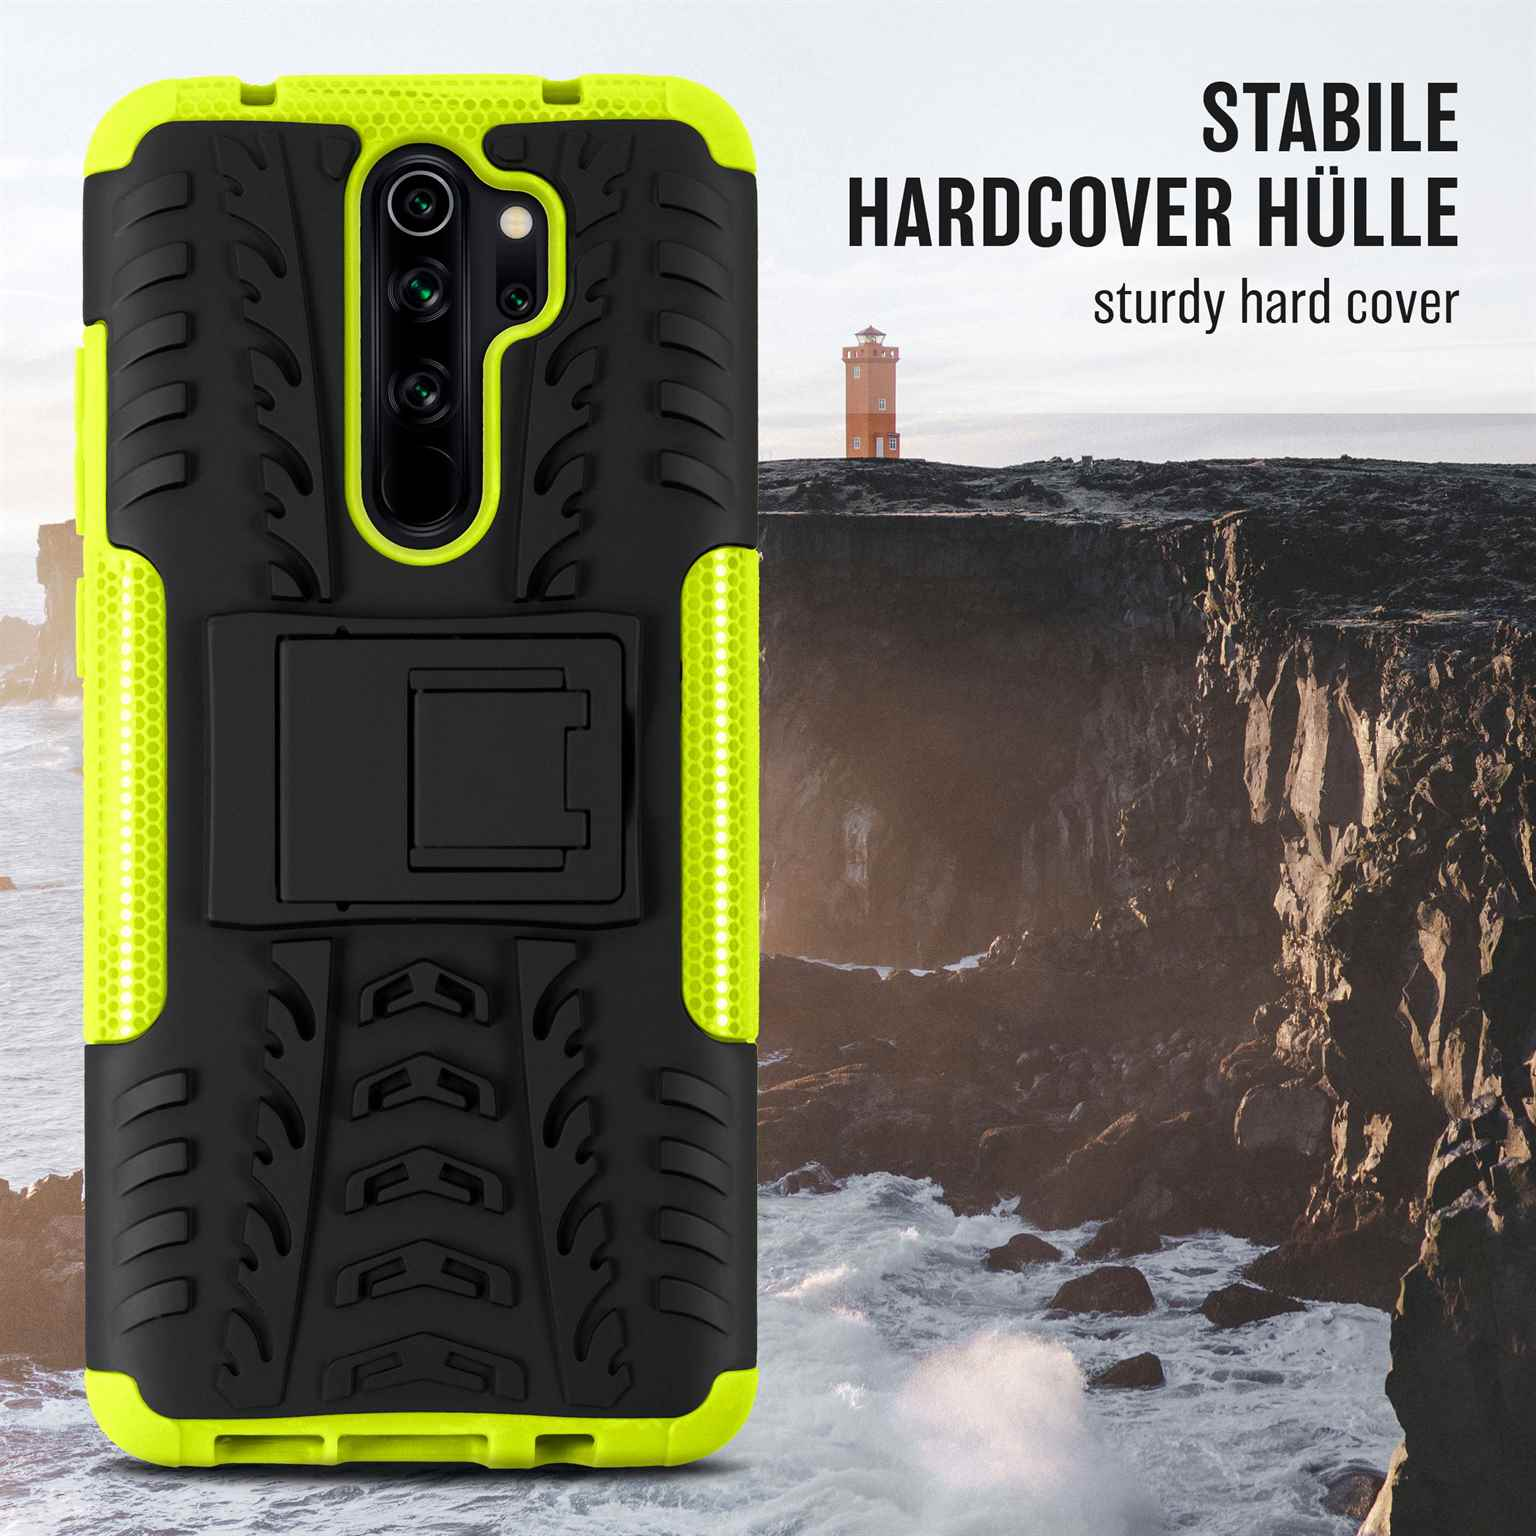 ONEFLOW Case, Note 8 Lime Pro, Tank Redmi Backcover, Xiaomi,